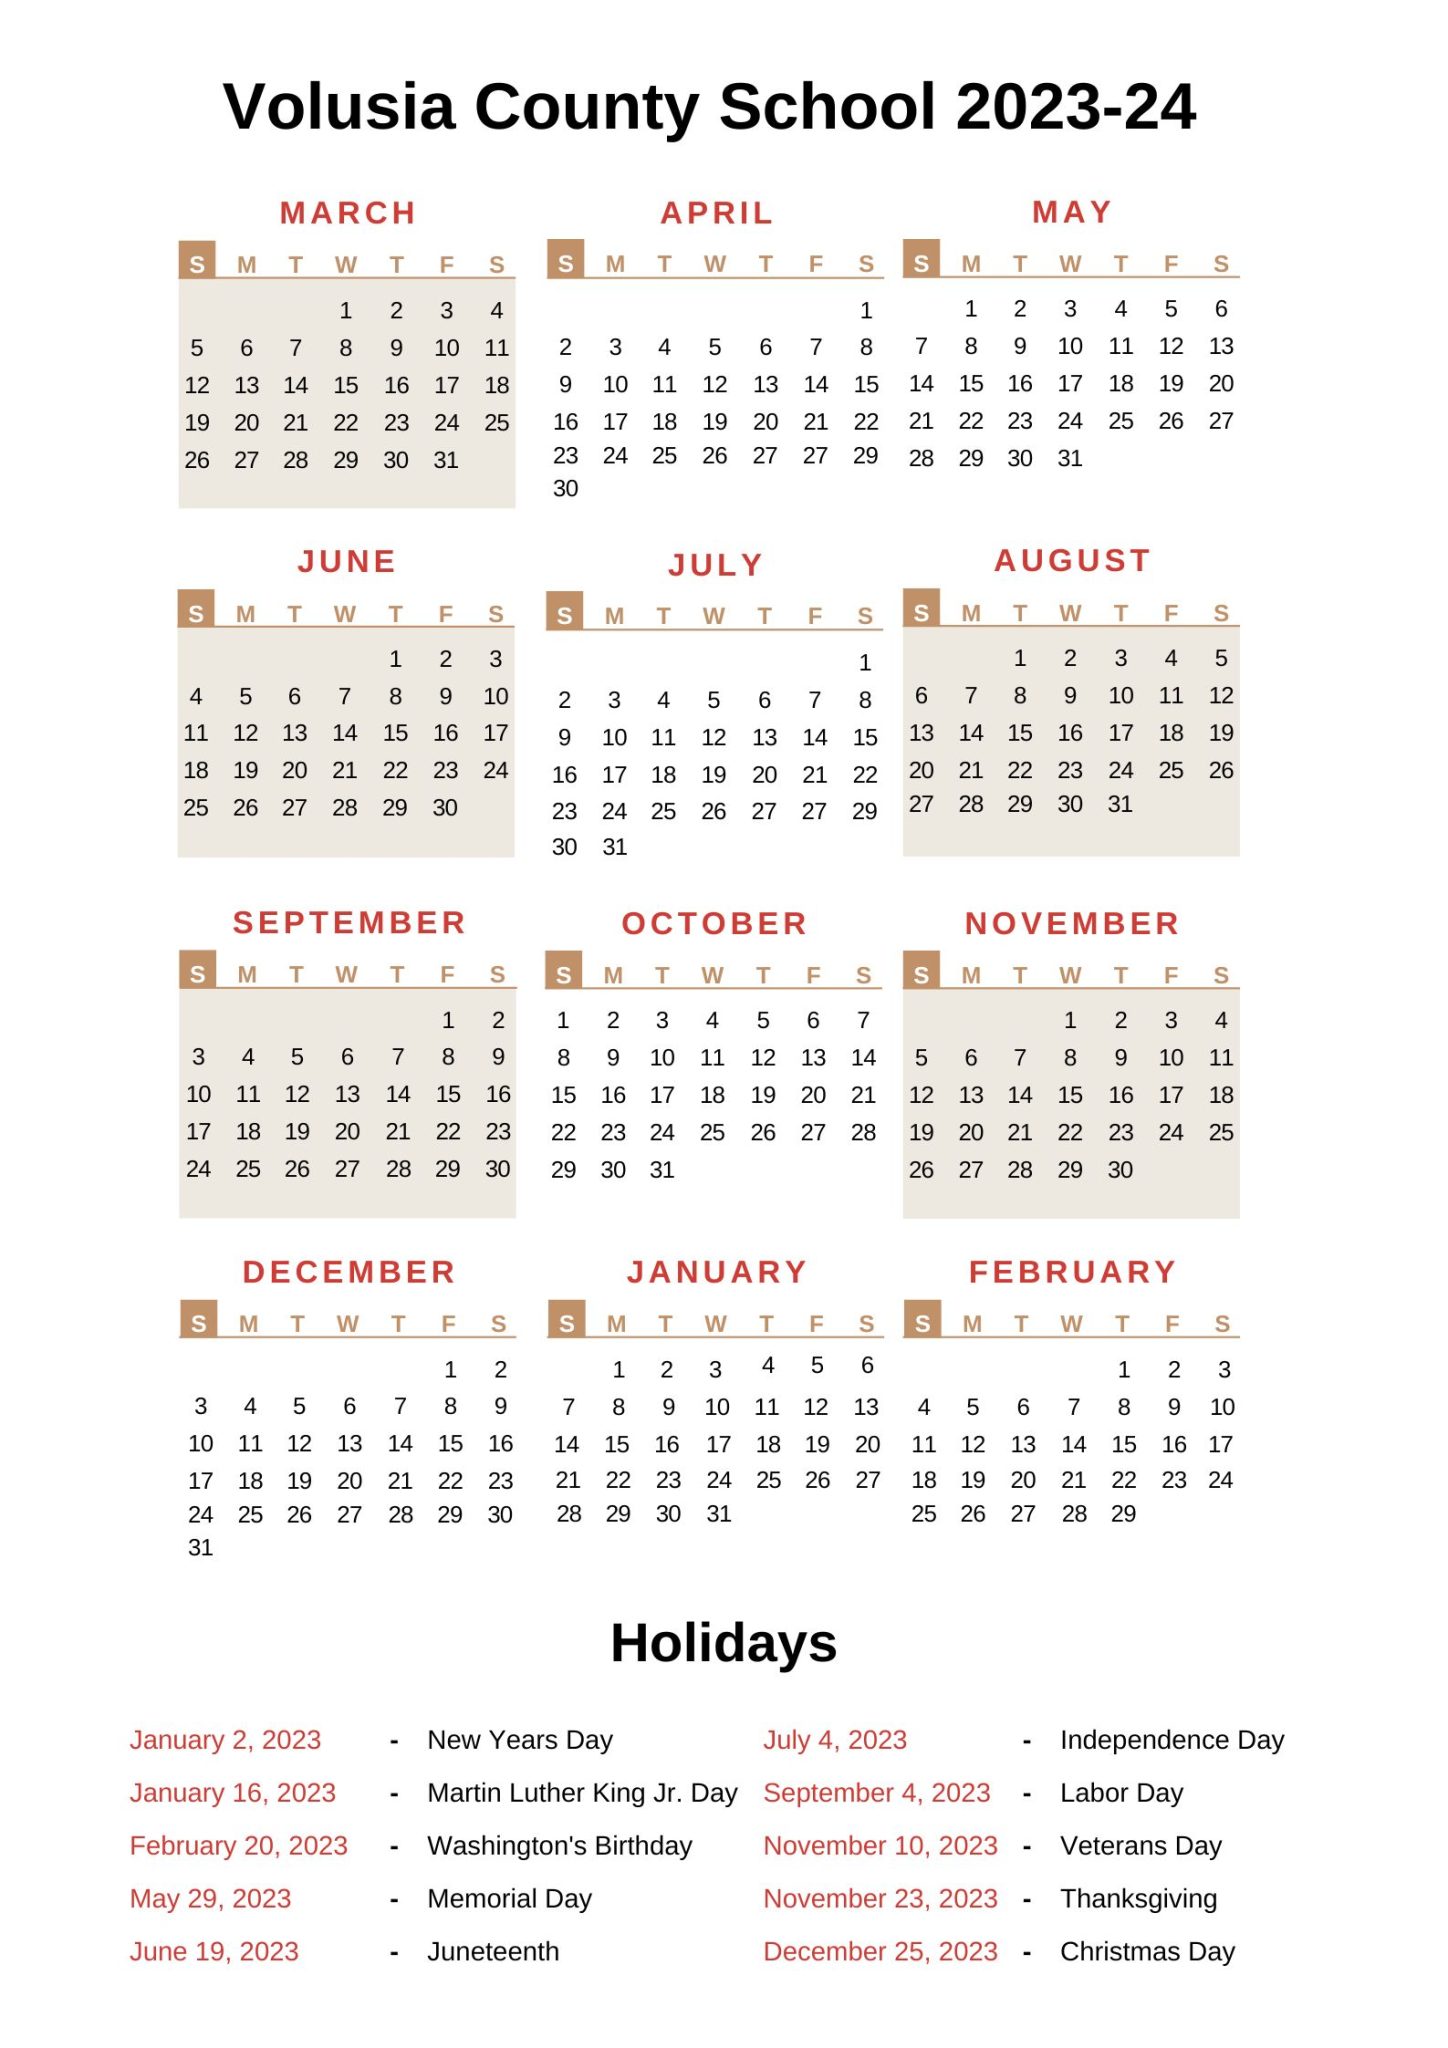 Volusia County School Calendar (20222023) with Holidays